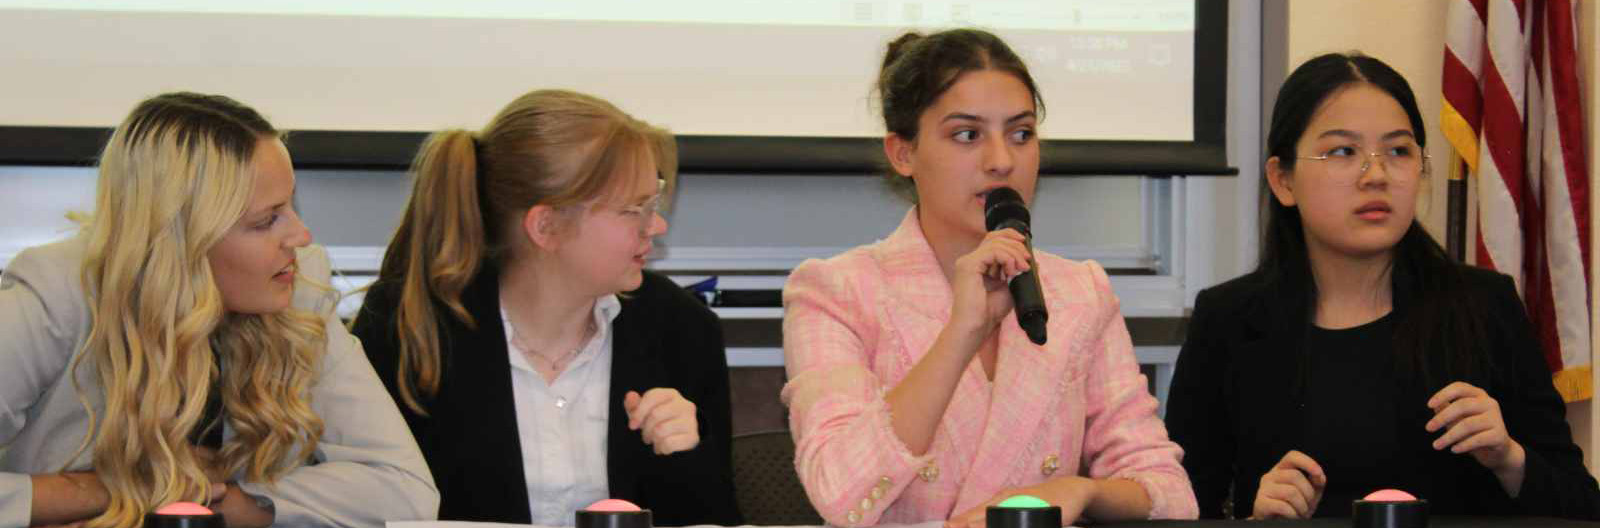 Four students talking at a table